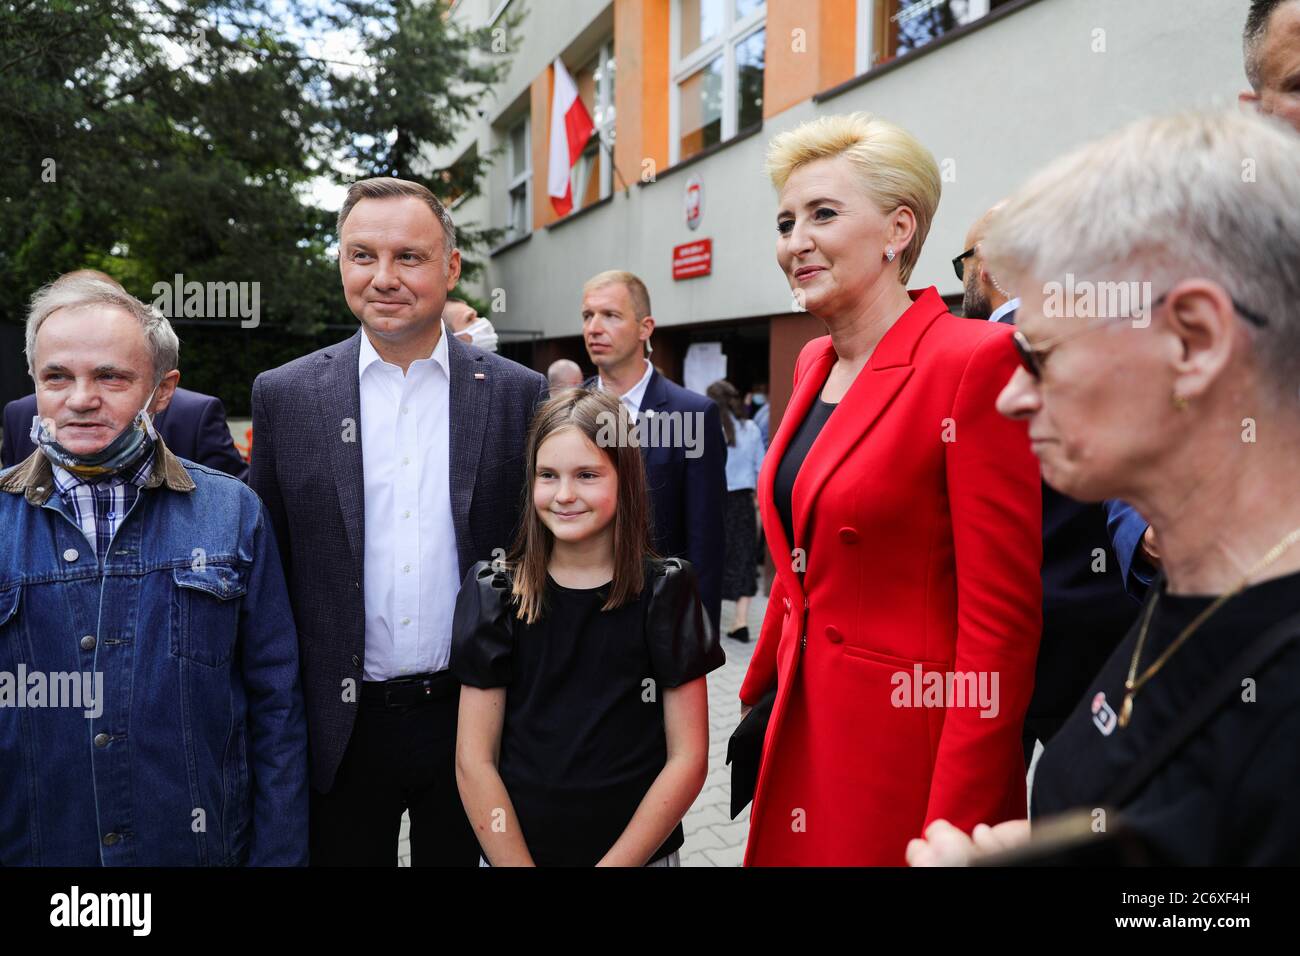 Polish presidential couple Andrzej Duda and Agata Kornhauser-Duda pose for a photo with their supporters after voting.  The incumbent President of Pol Stock Photo